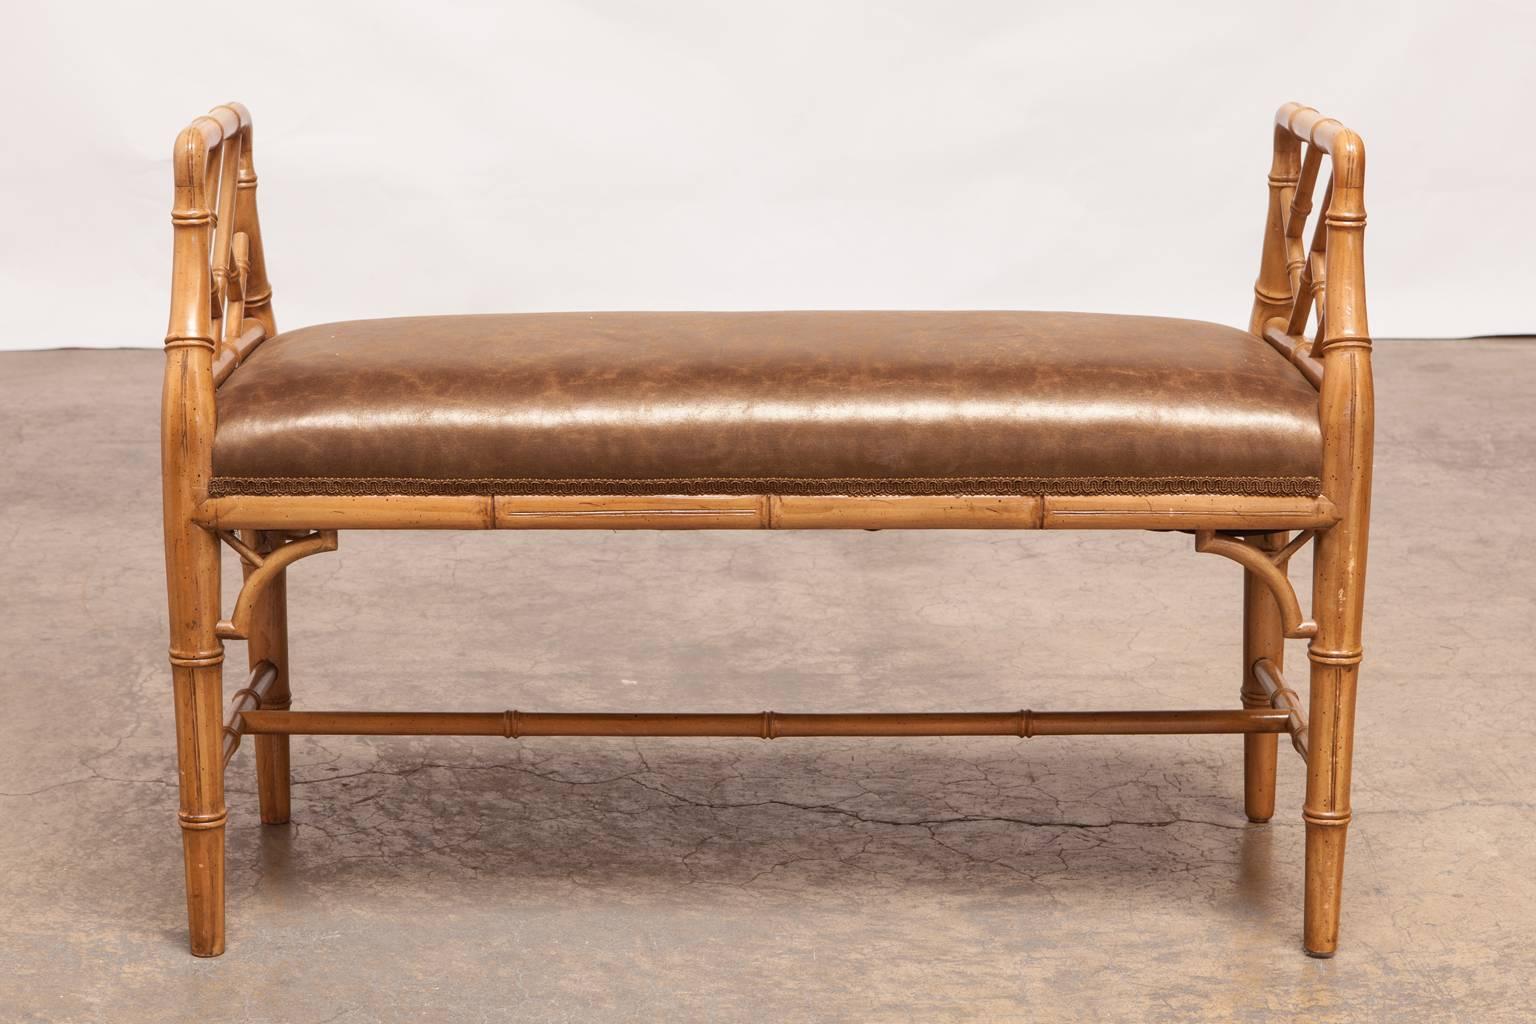 Stylish window bench made in the Chinese Chippendale style featuring an open fretwork design on both ends and decorative spandrels. Upholstered in rich marbled faux leather.